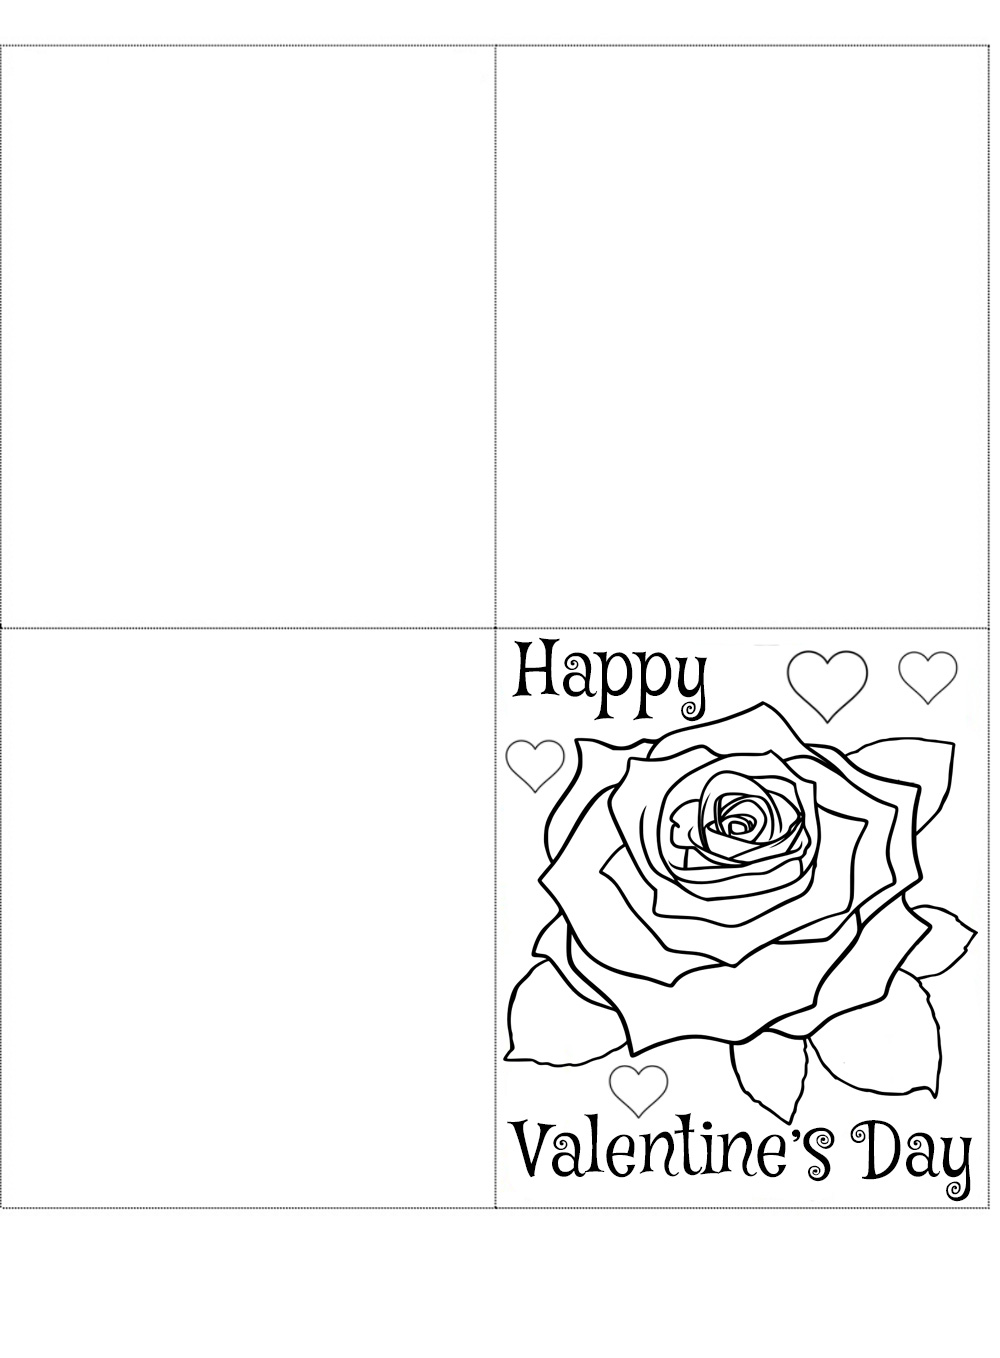 free-printable-folding-heart-card-printable-valentine-s-day-cards-in